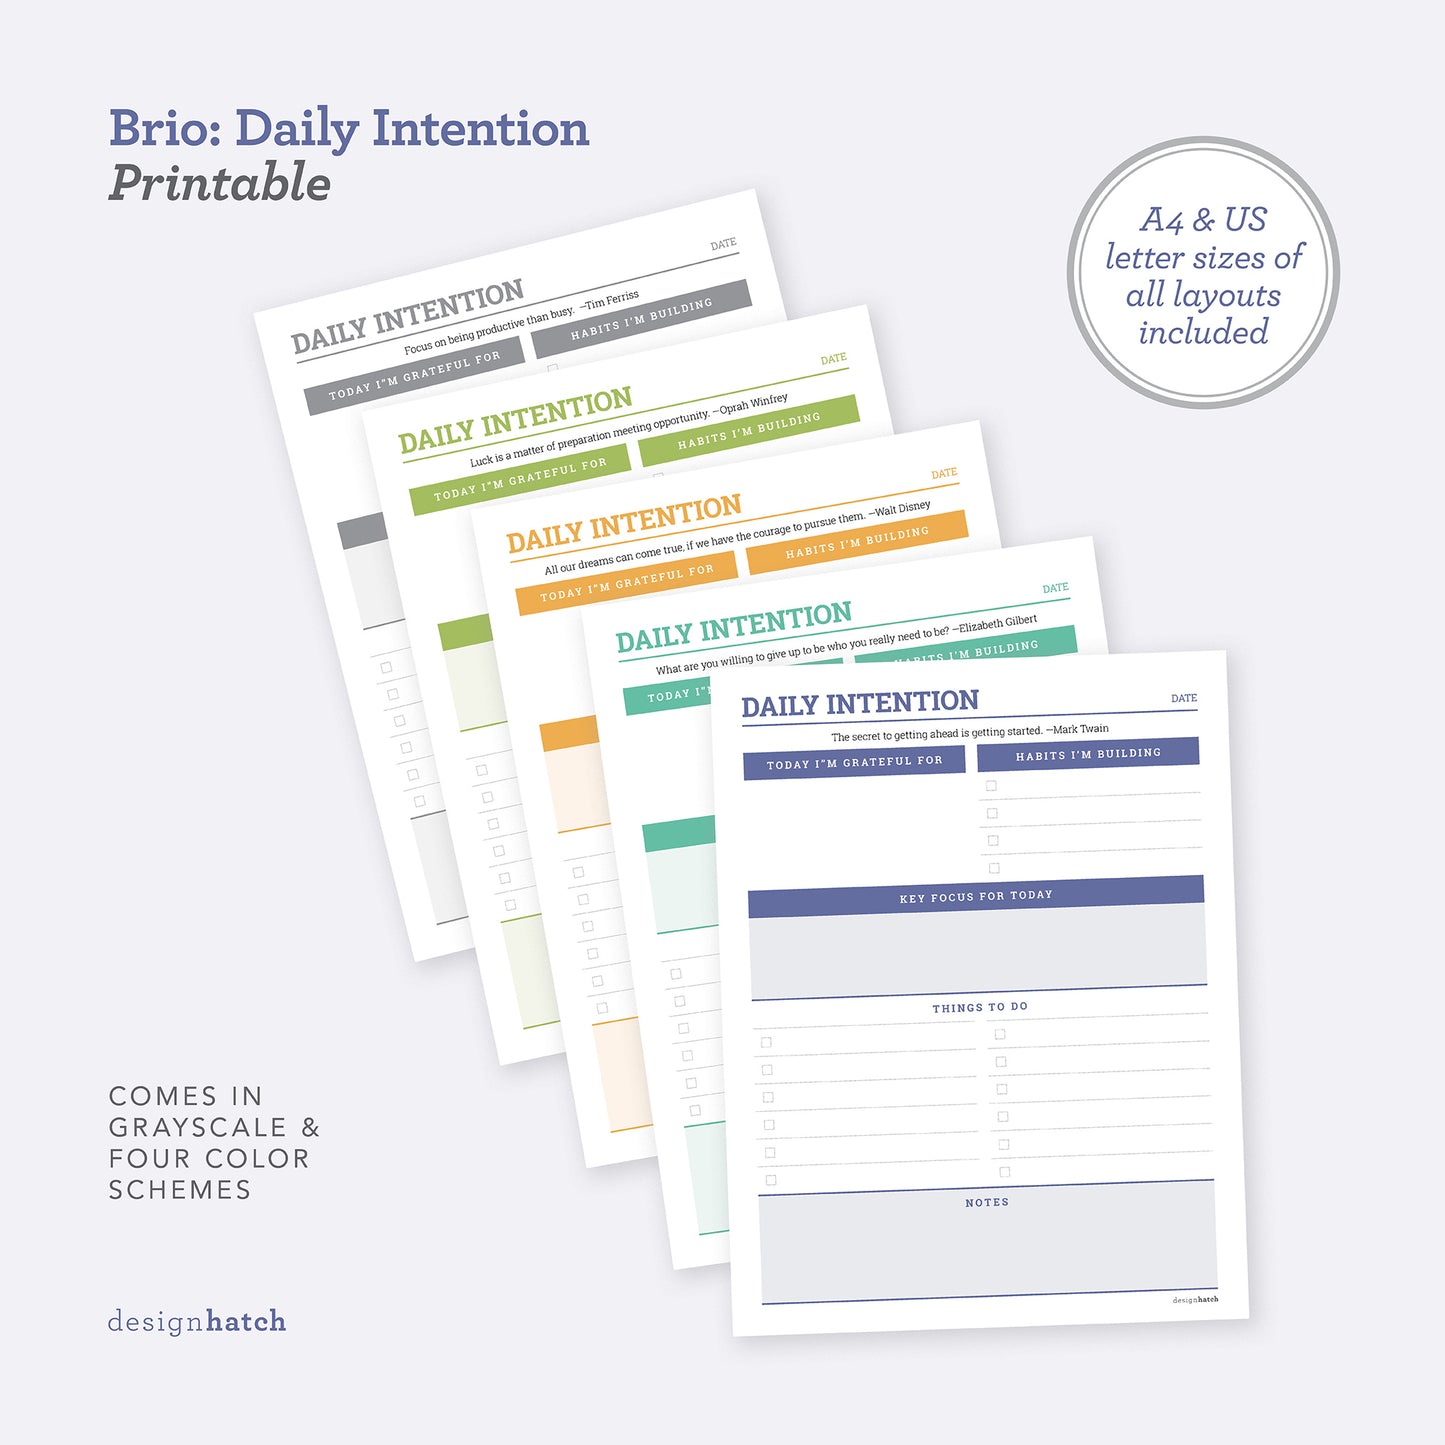 Brio: Daily Intention